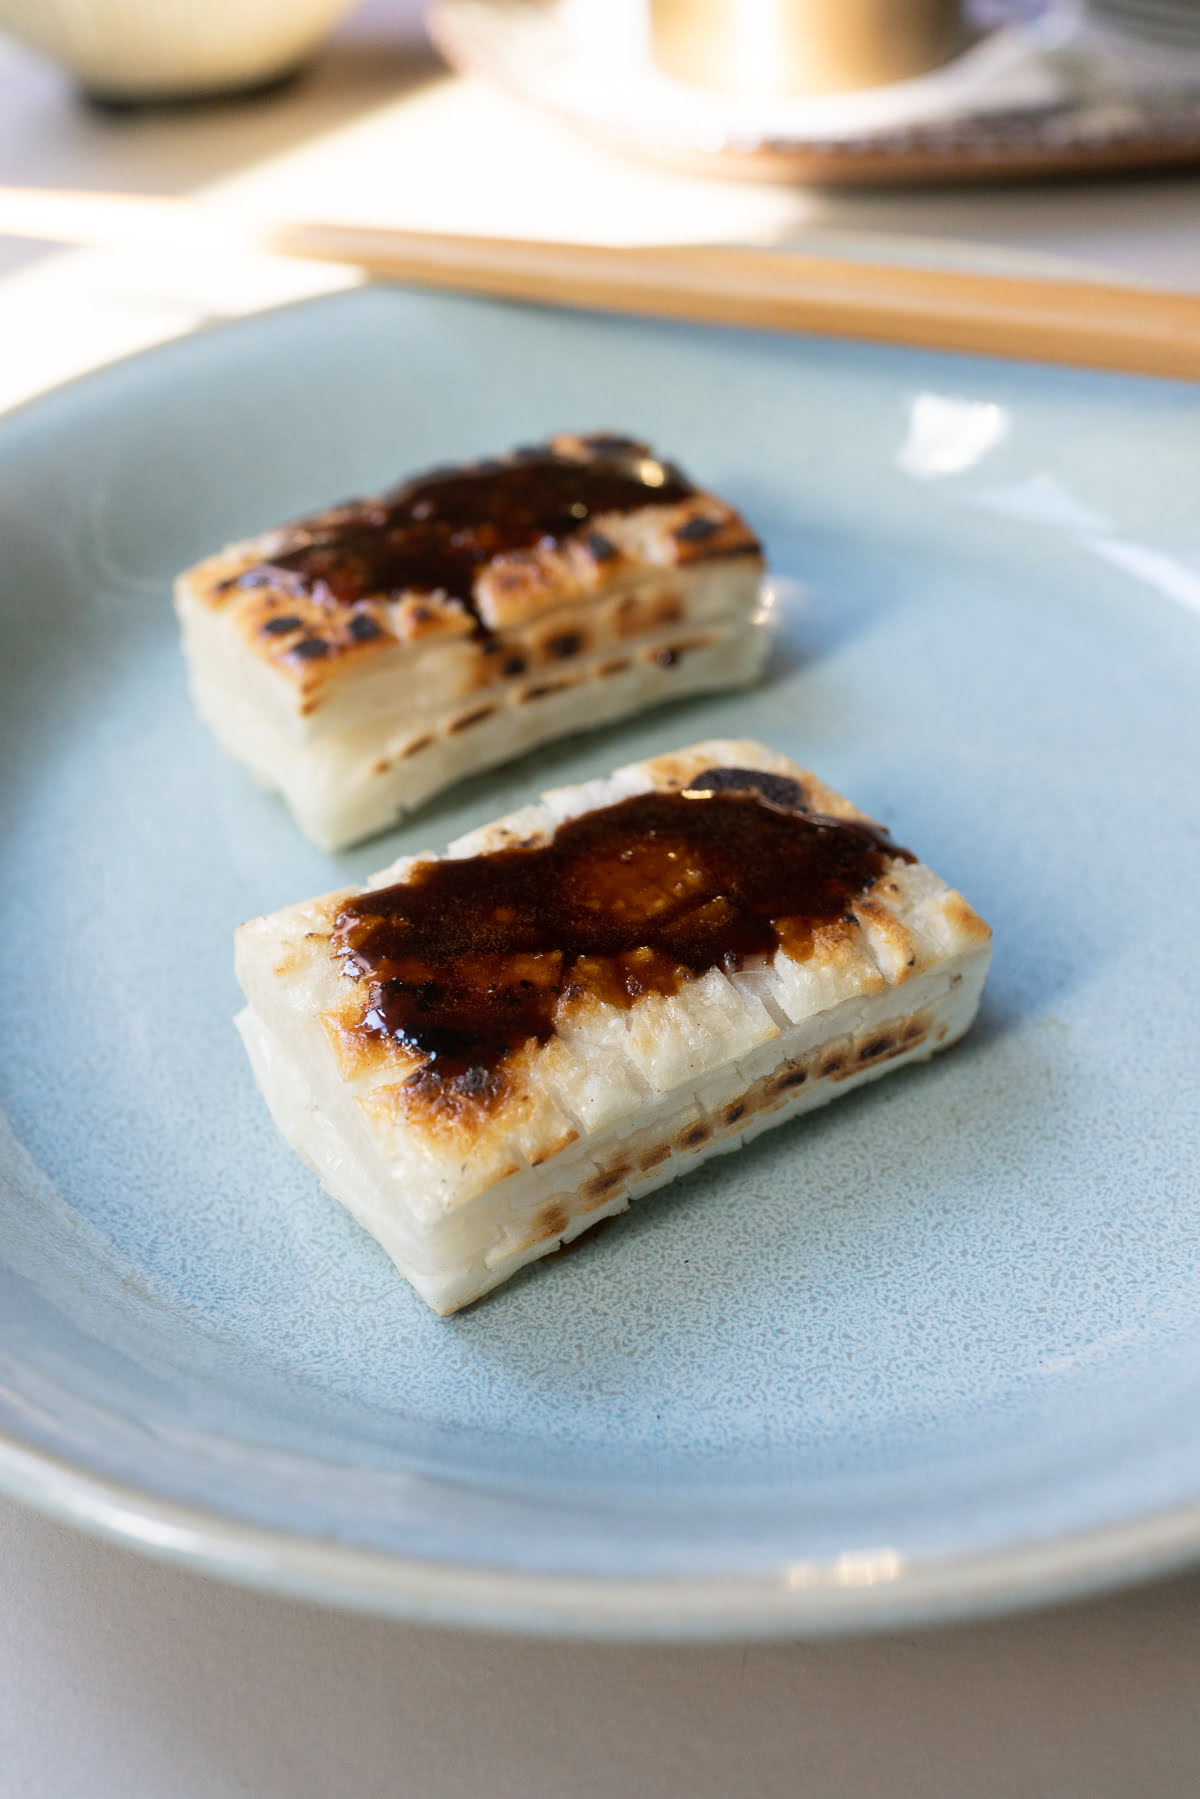 Pan fried kirimochi with soy sauce glaze brushed on top.